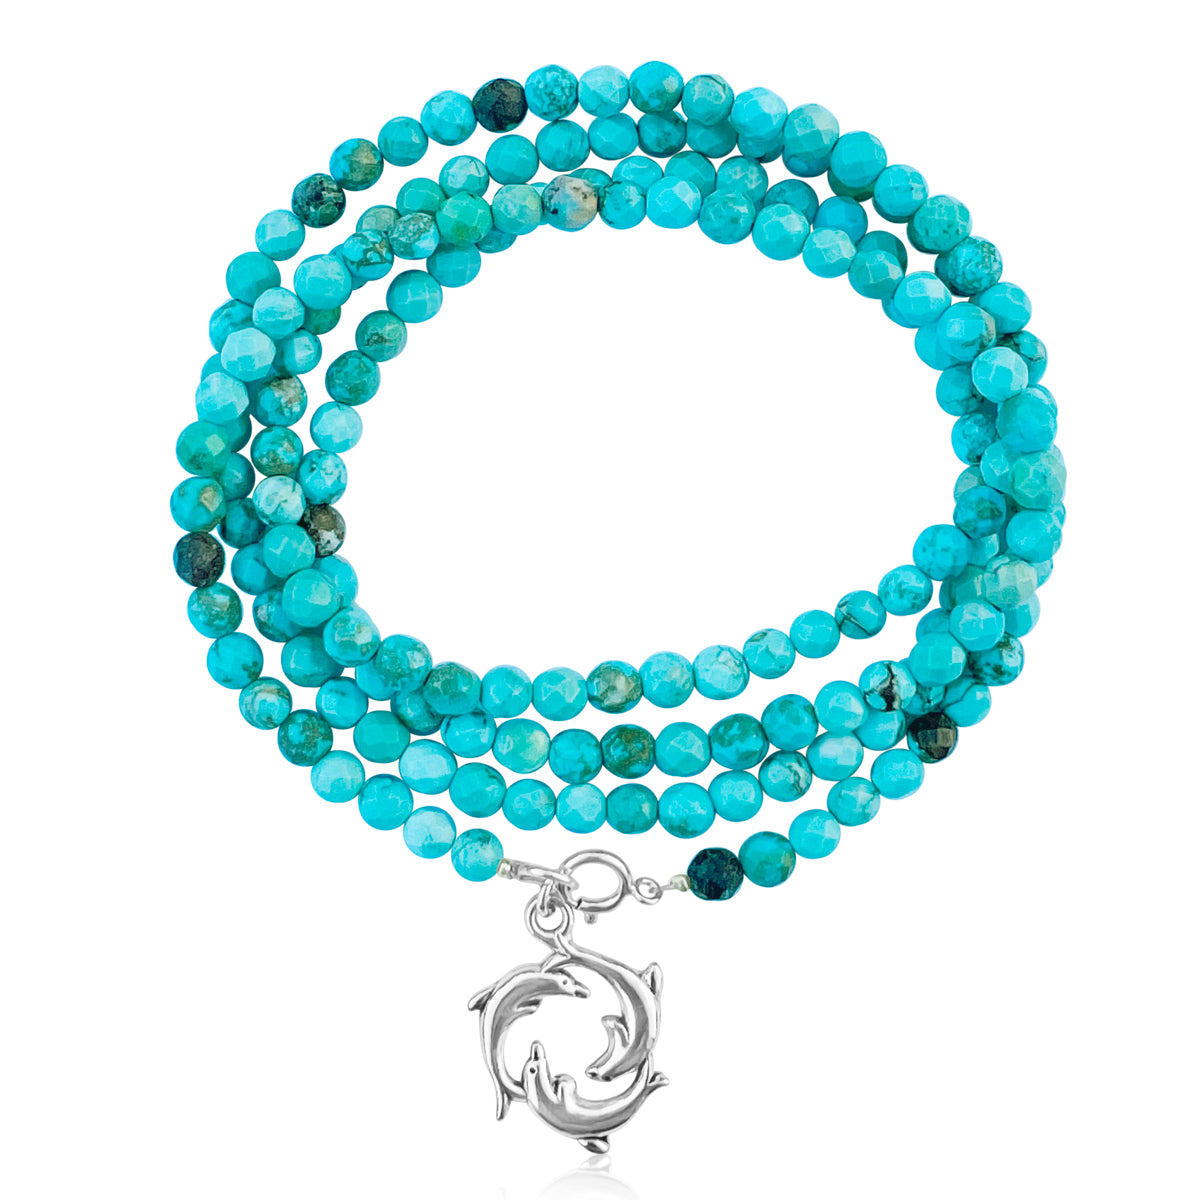 The Dolphin Dance Wrap Bracelet embodies a captivating blend of spirited grace, capturing the dynamic allure of the ocean.